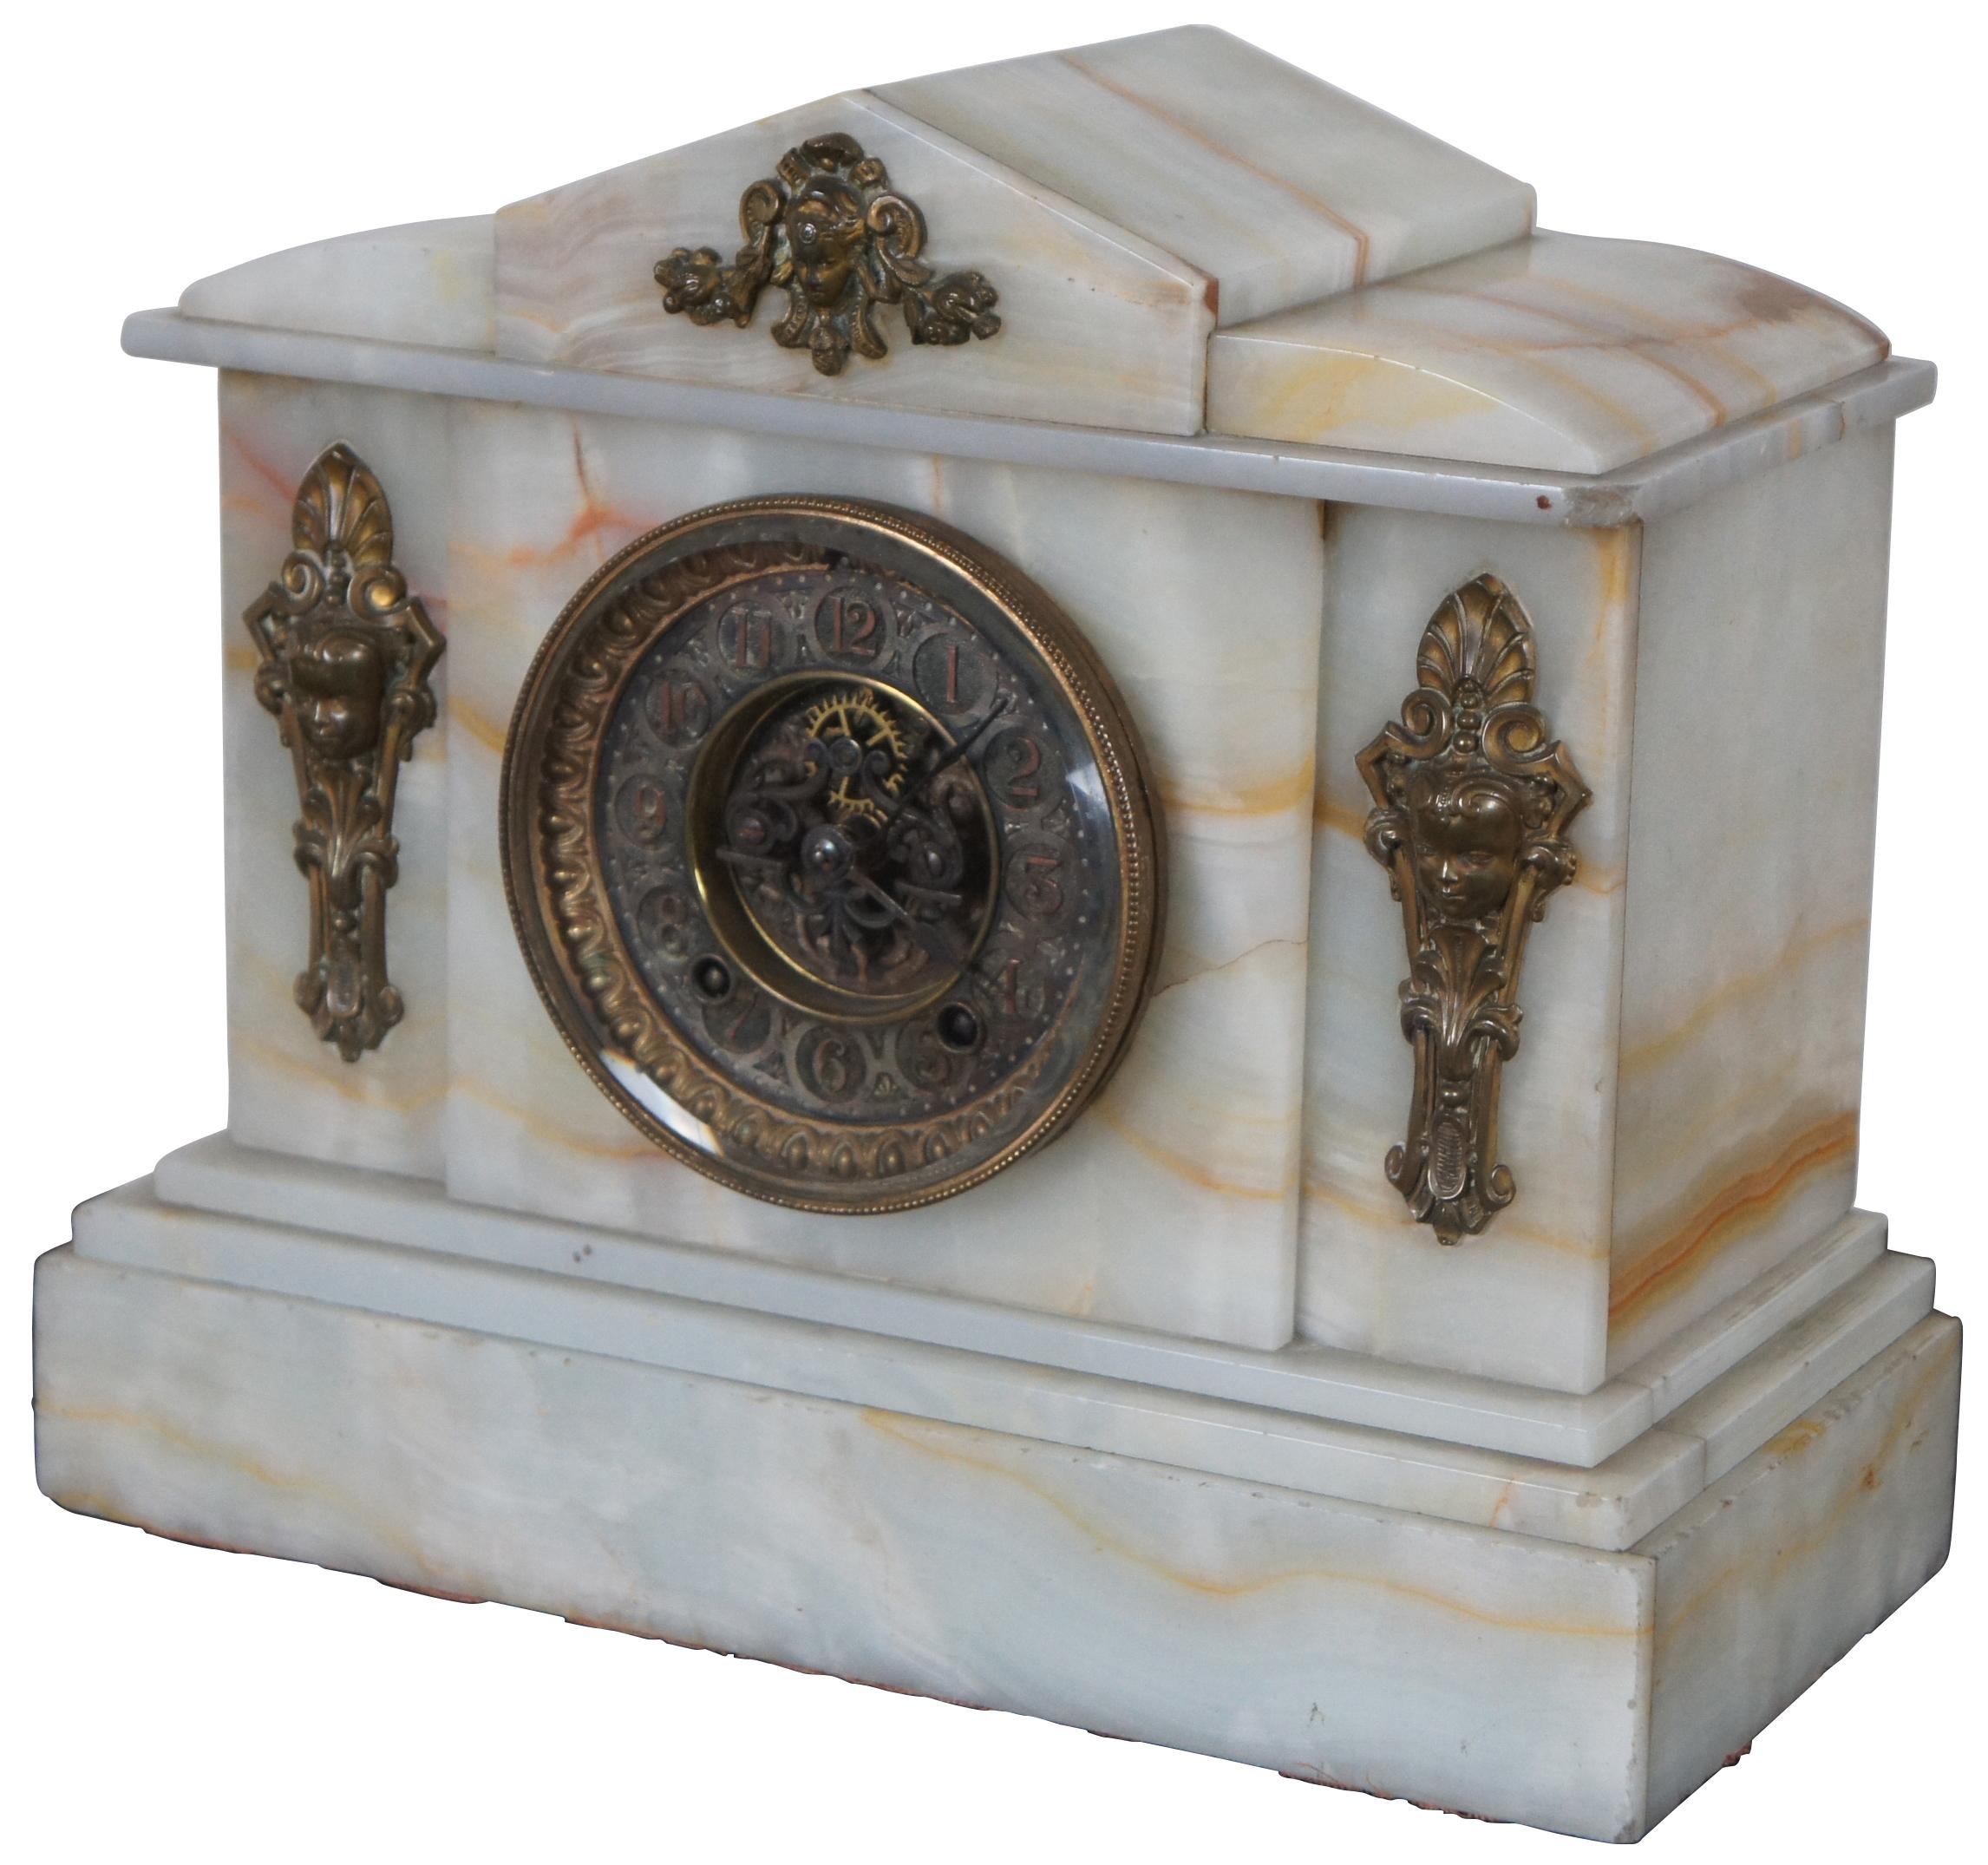 Antique Ansonia white onyx mantel clock with brass face and ormolu caryatid mounts. Features open escapement.
 